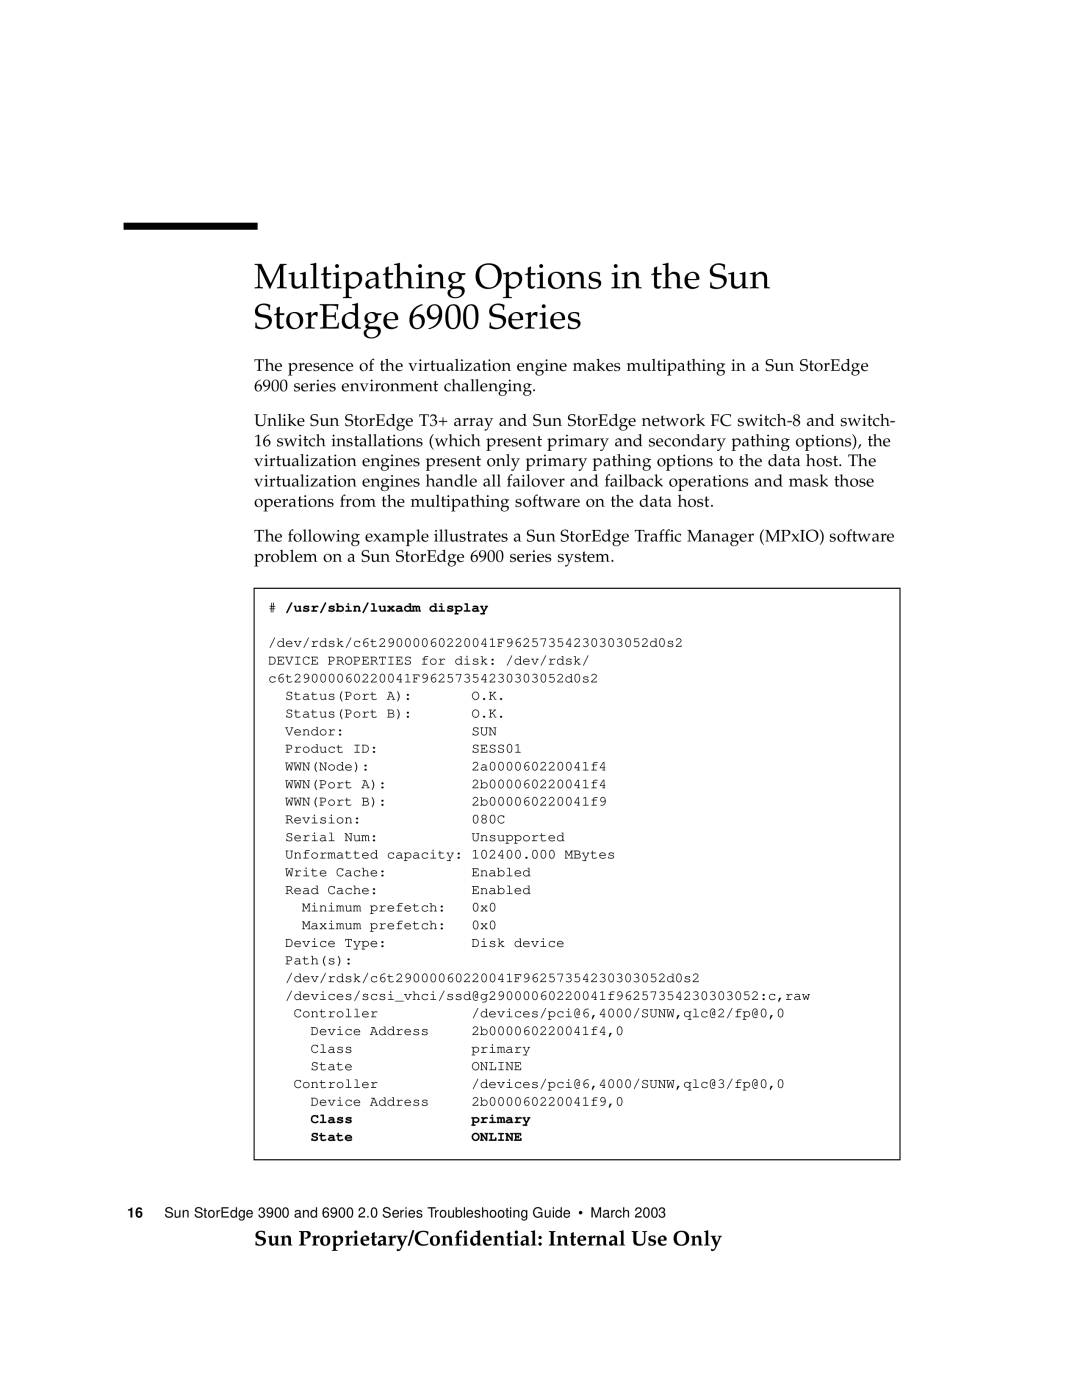 Sun Microsystems 3900 Multipathing Options in the Sun StorEdge 6900 Series, Sun Proprietary/Confidential Internal Use Only 